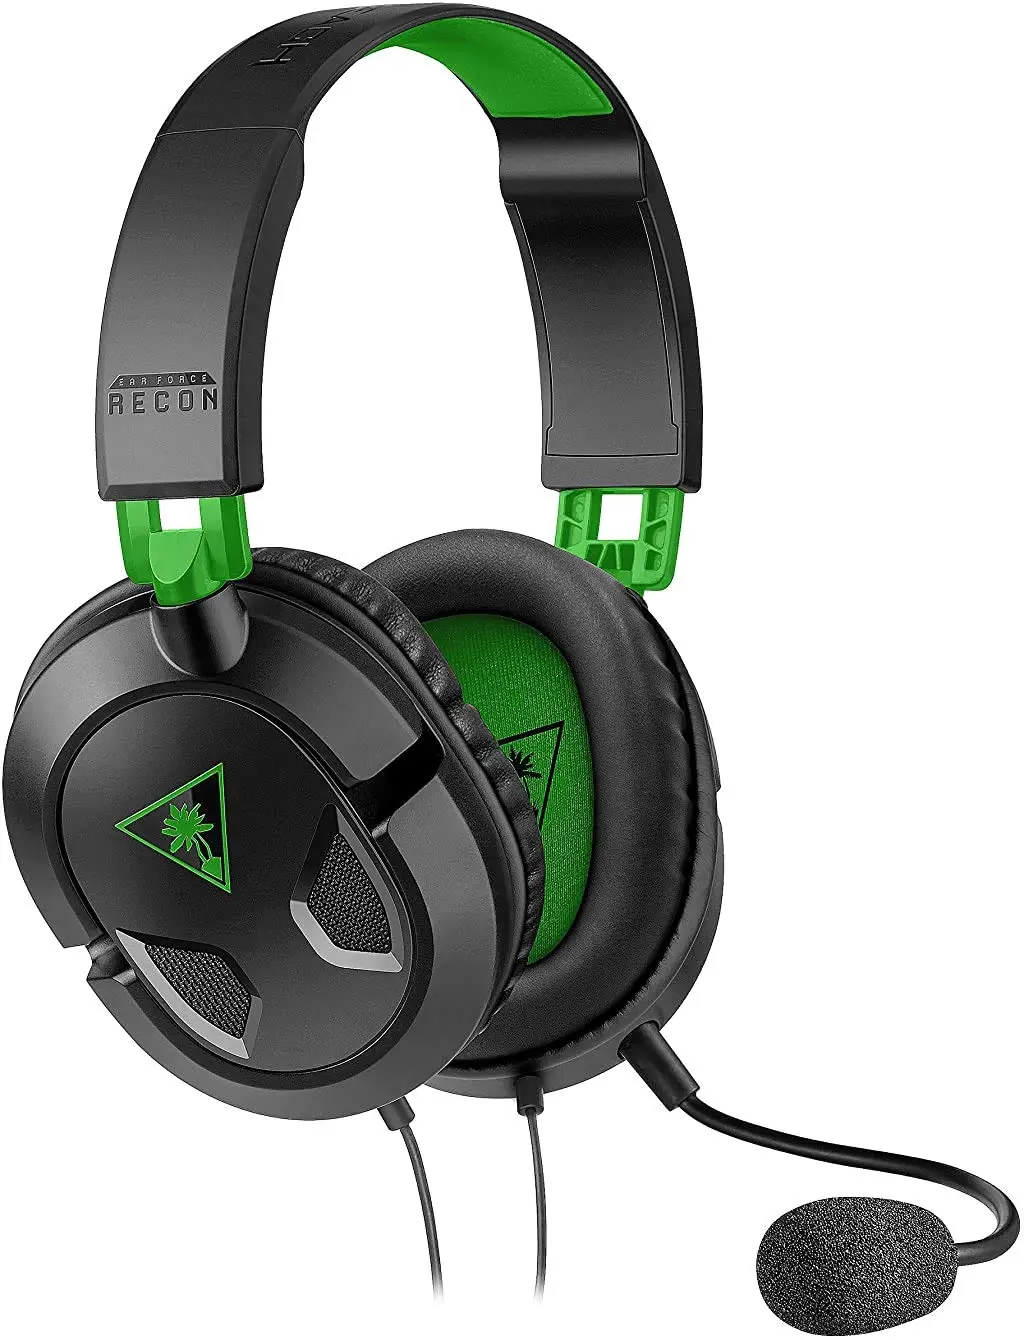 best gaming headset for pc under $30